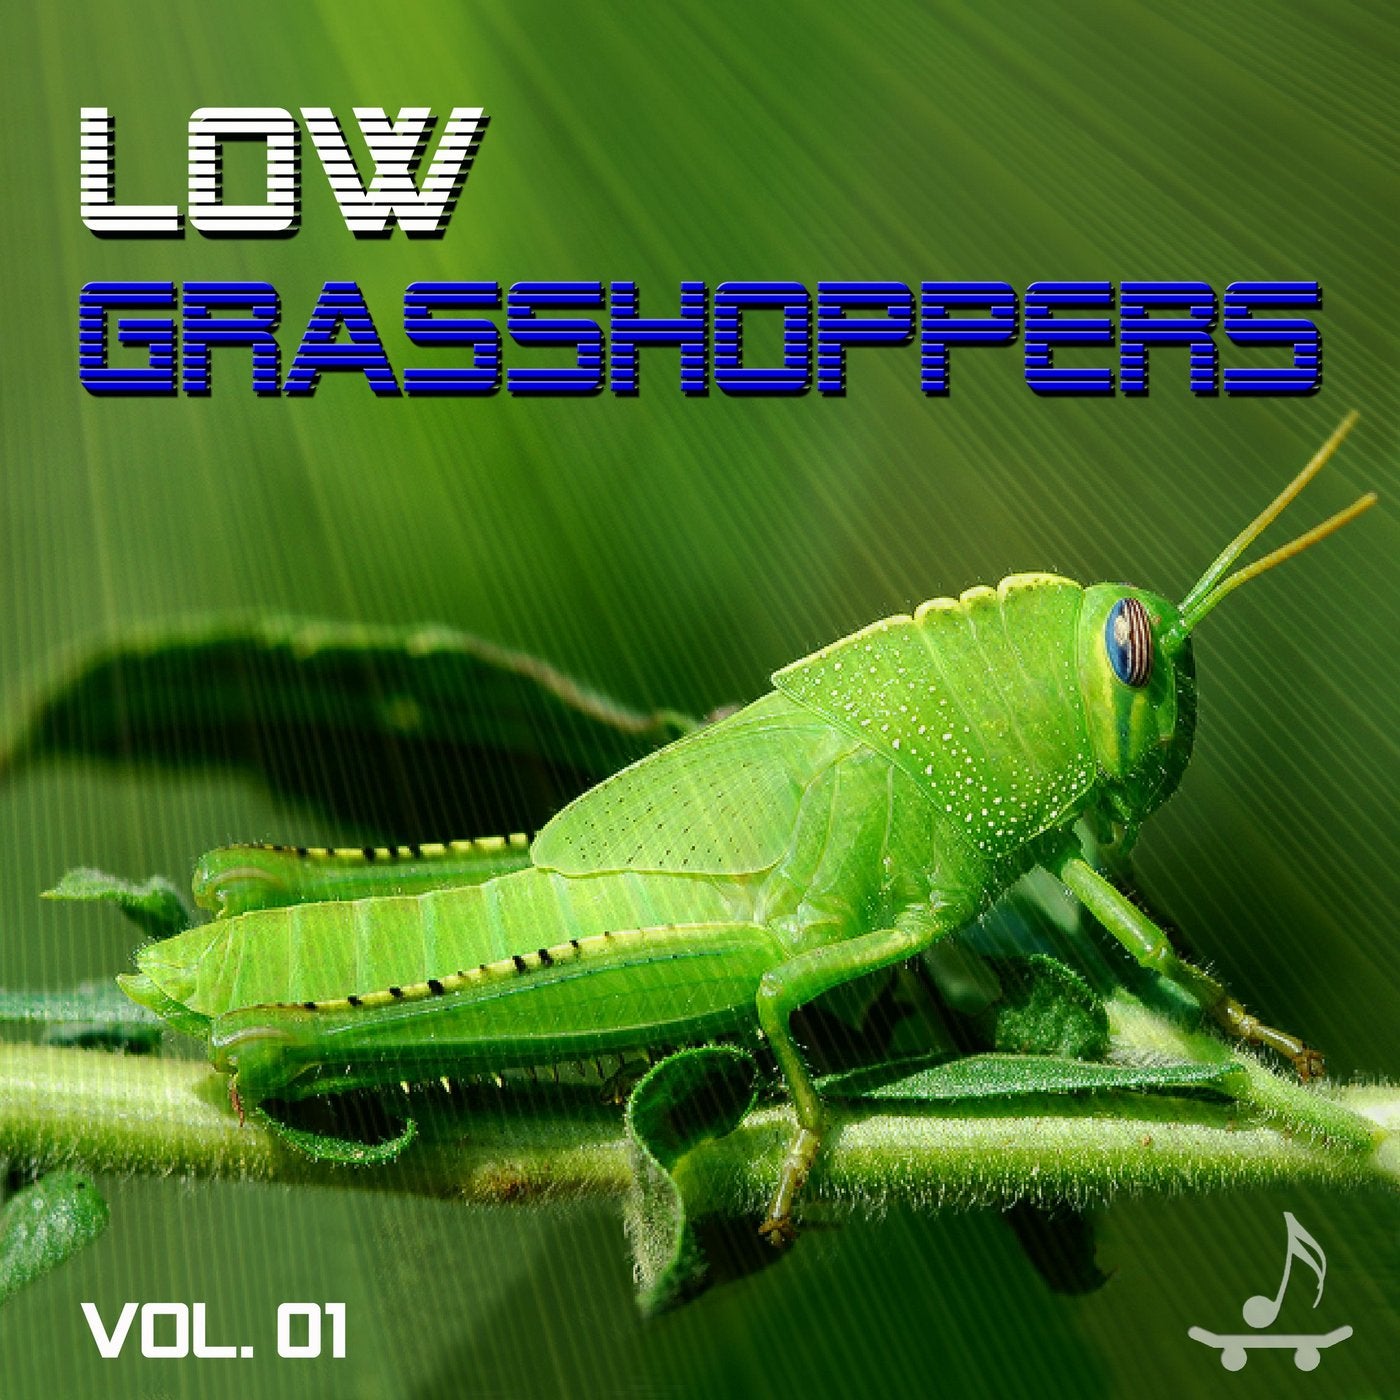 Low Grasshoppers - Vol.01